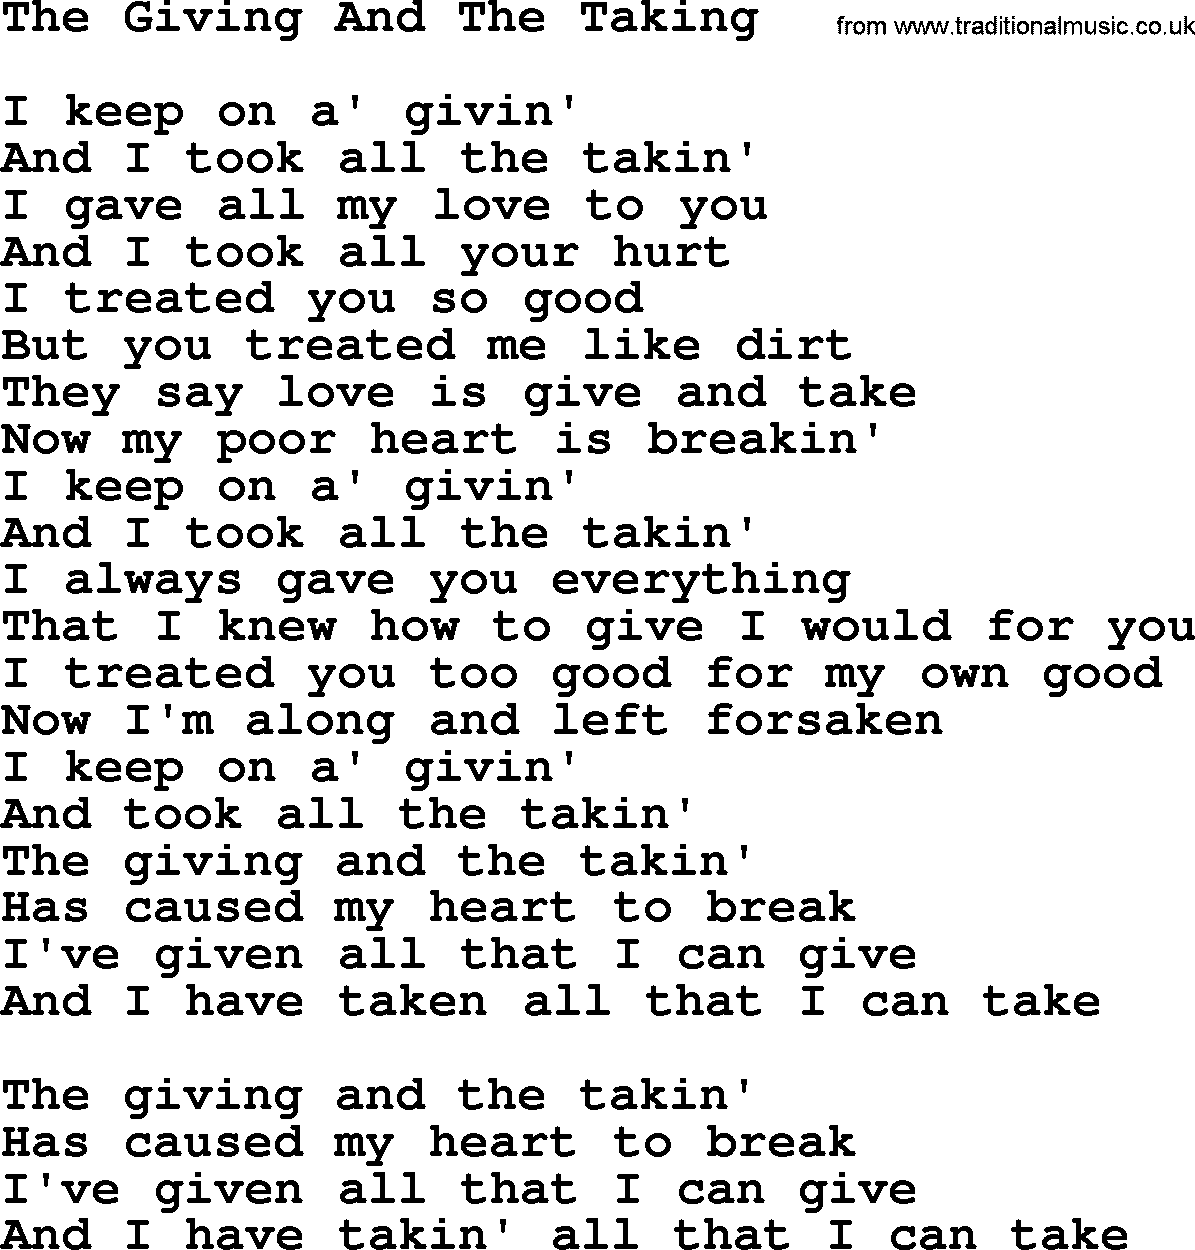 Dolly Parton song The Giving And The Taking.txt lyrics